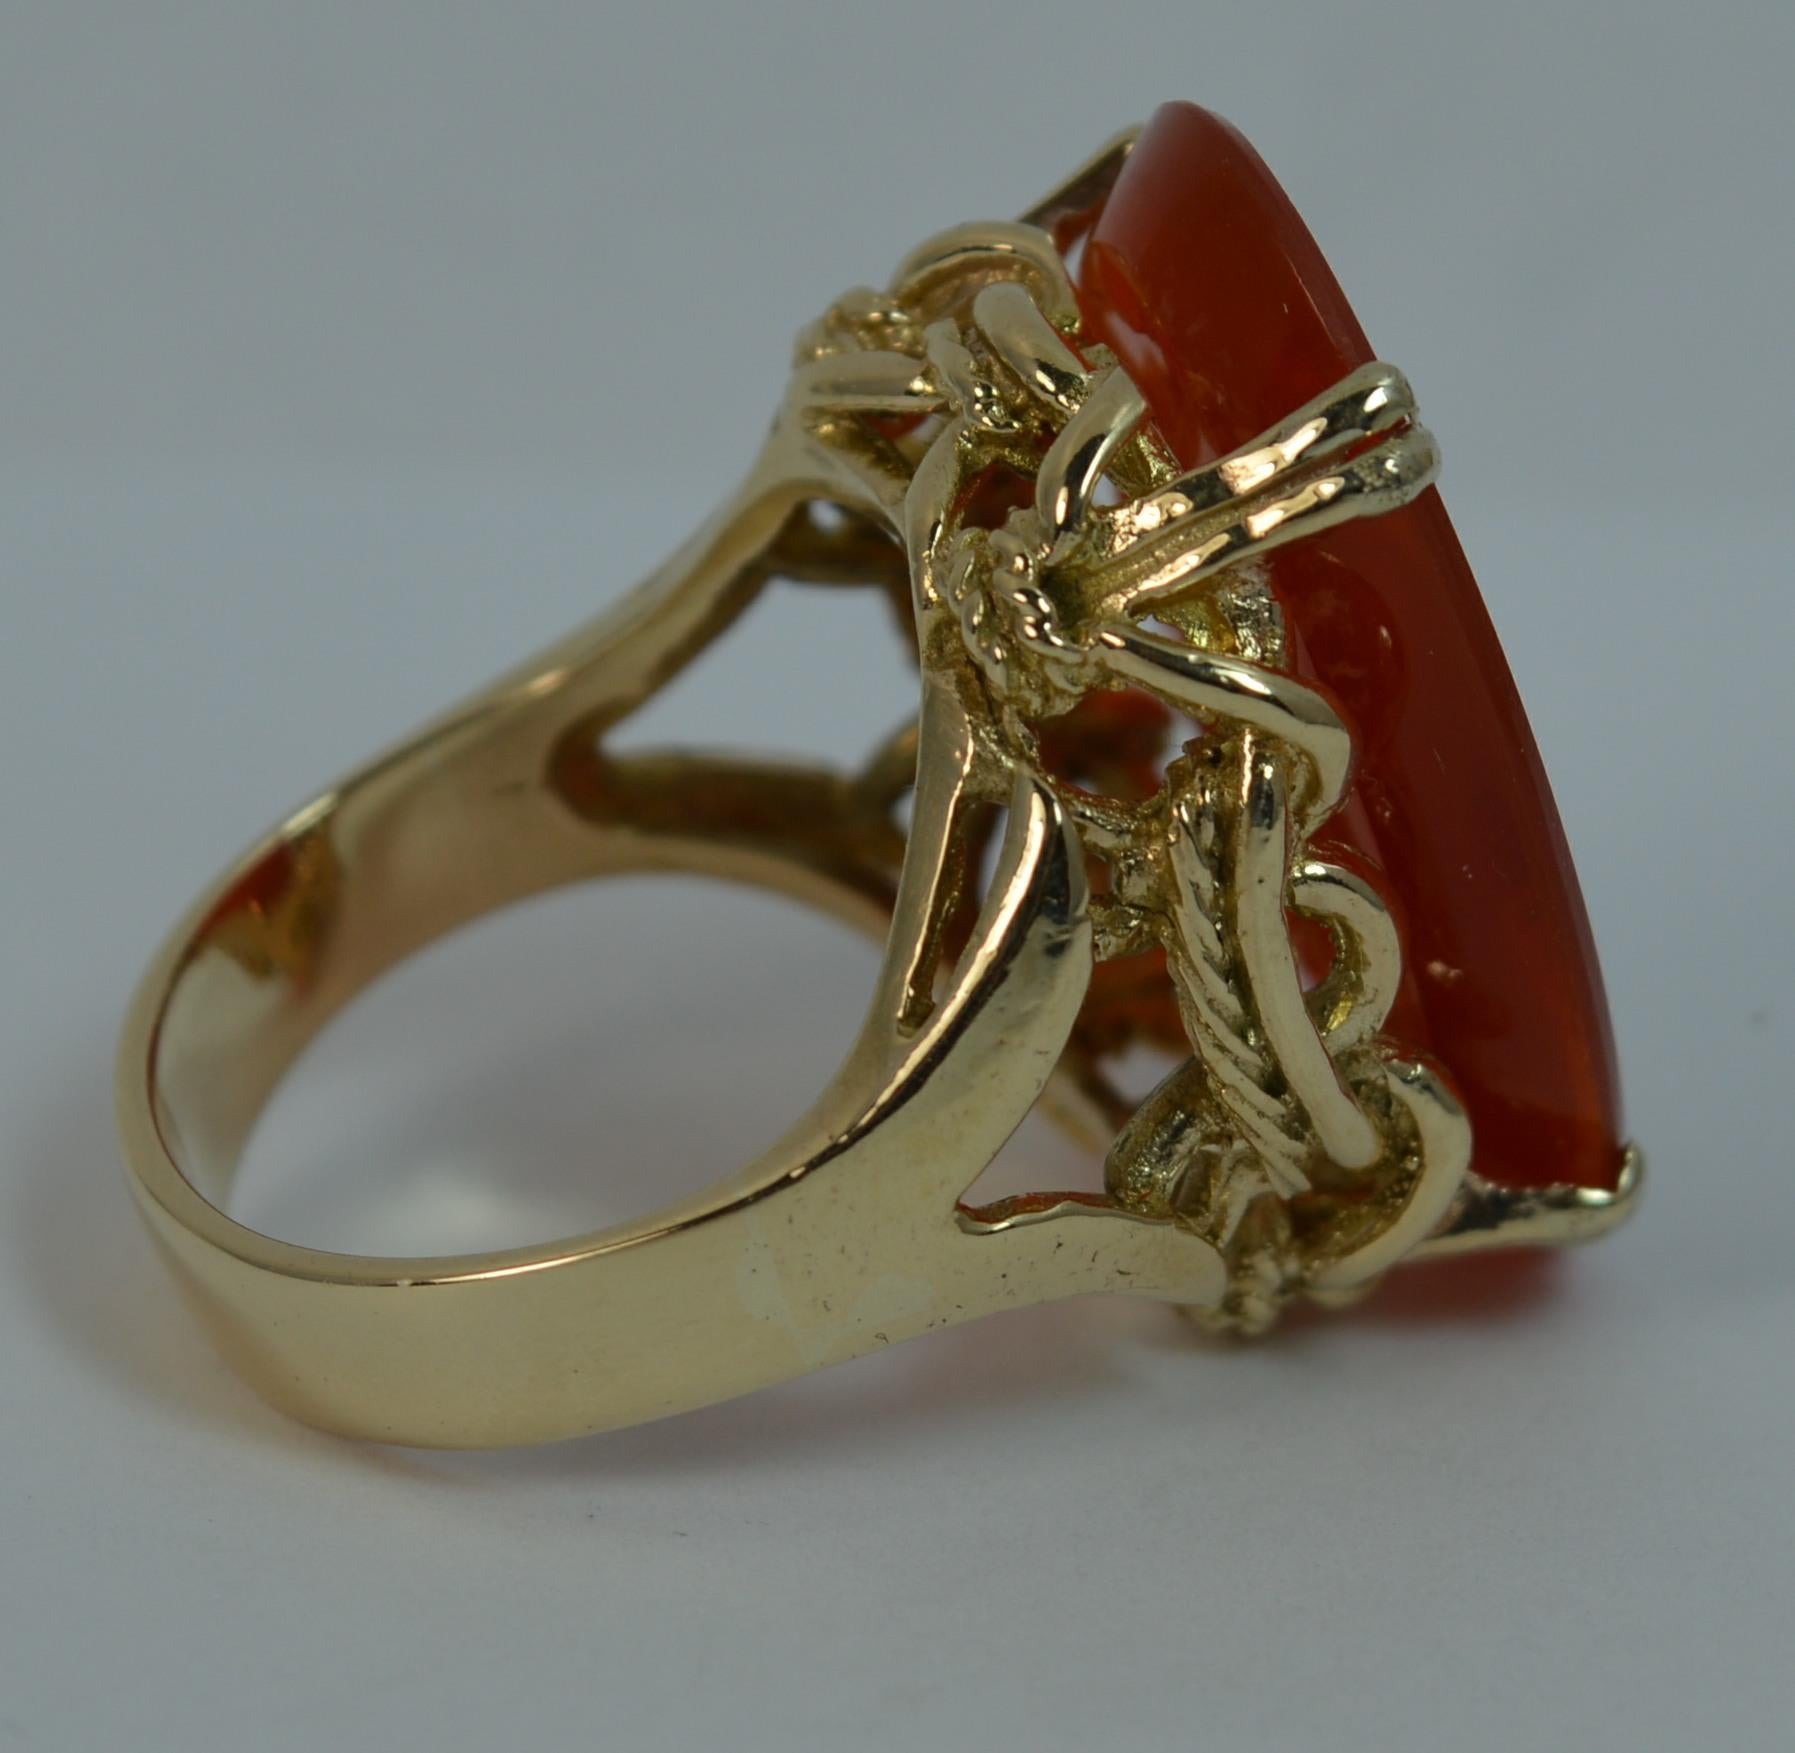 Large Wild Boar Head Carnelian Agate and 9 Carat Gold Intaglio Seal Signet Ring 4